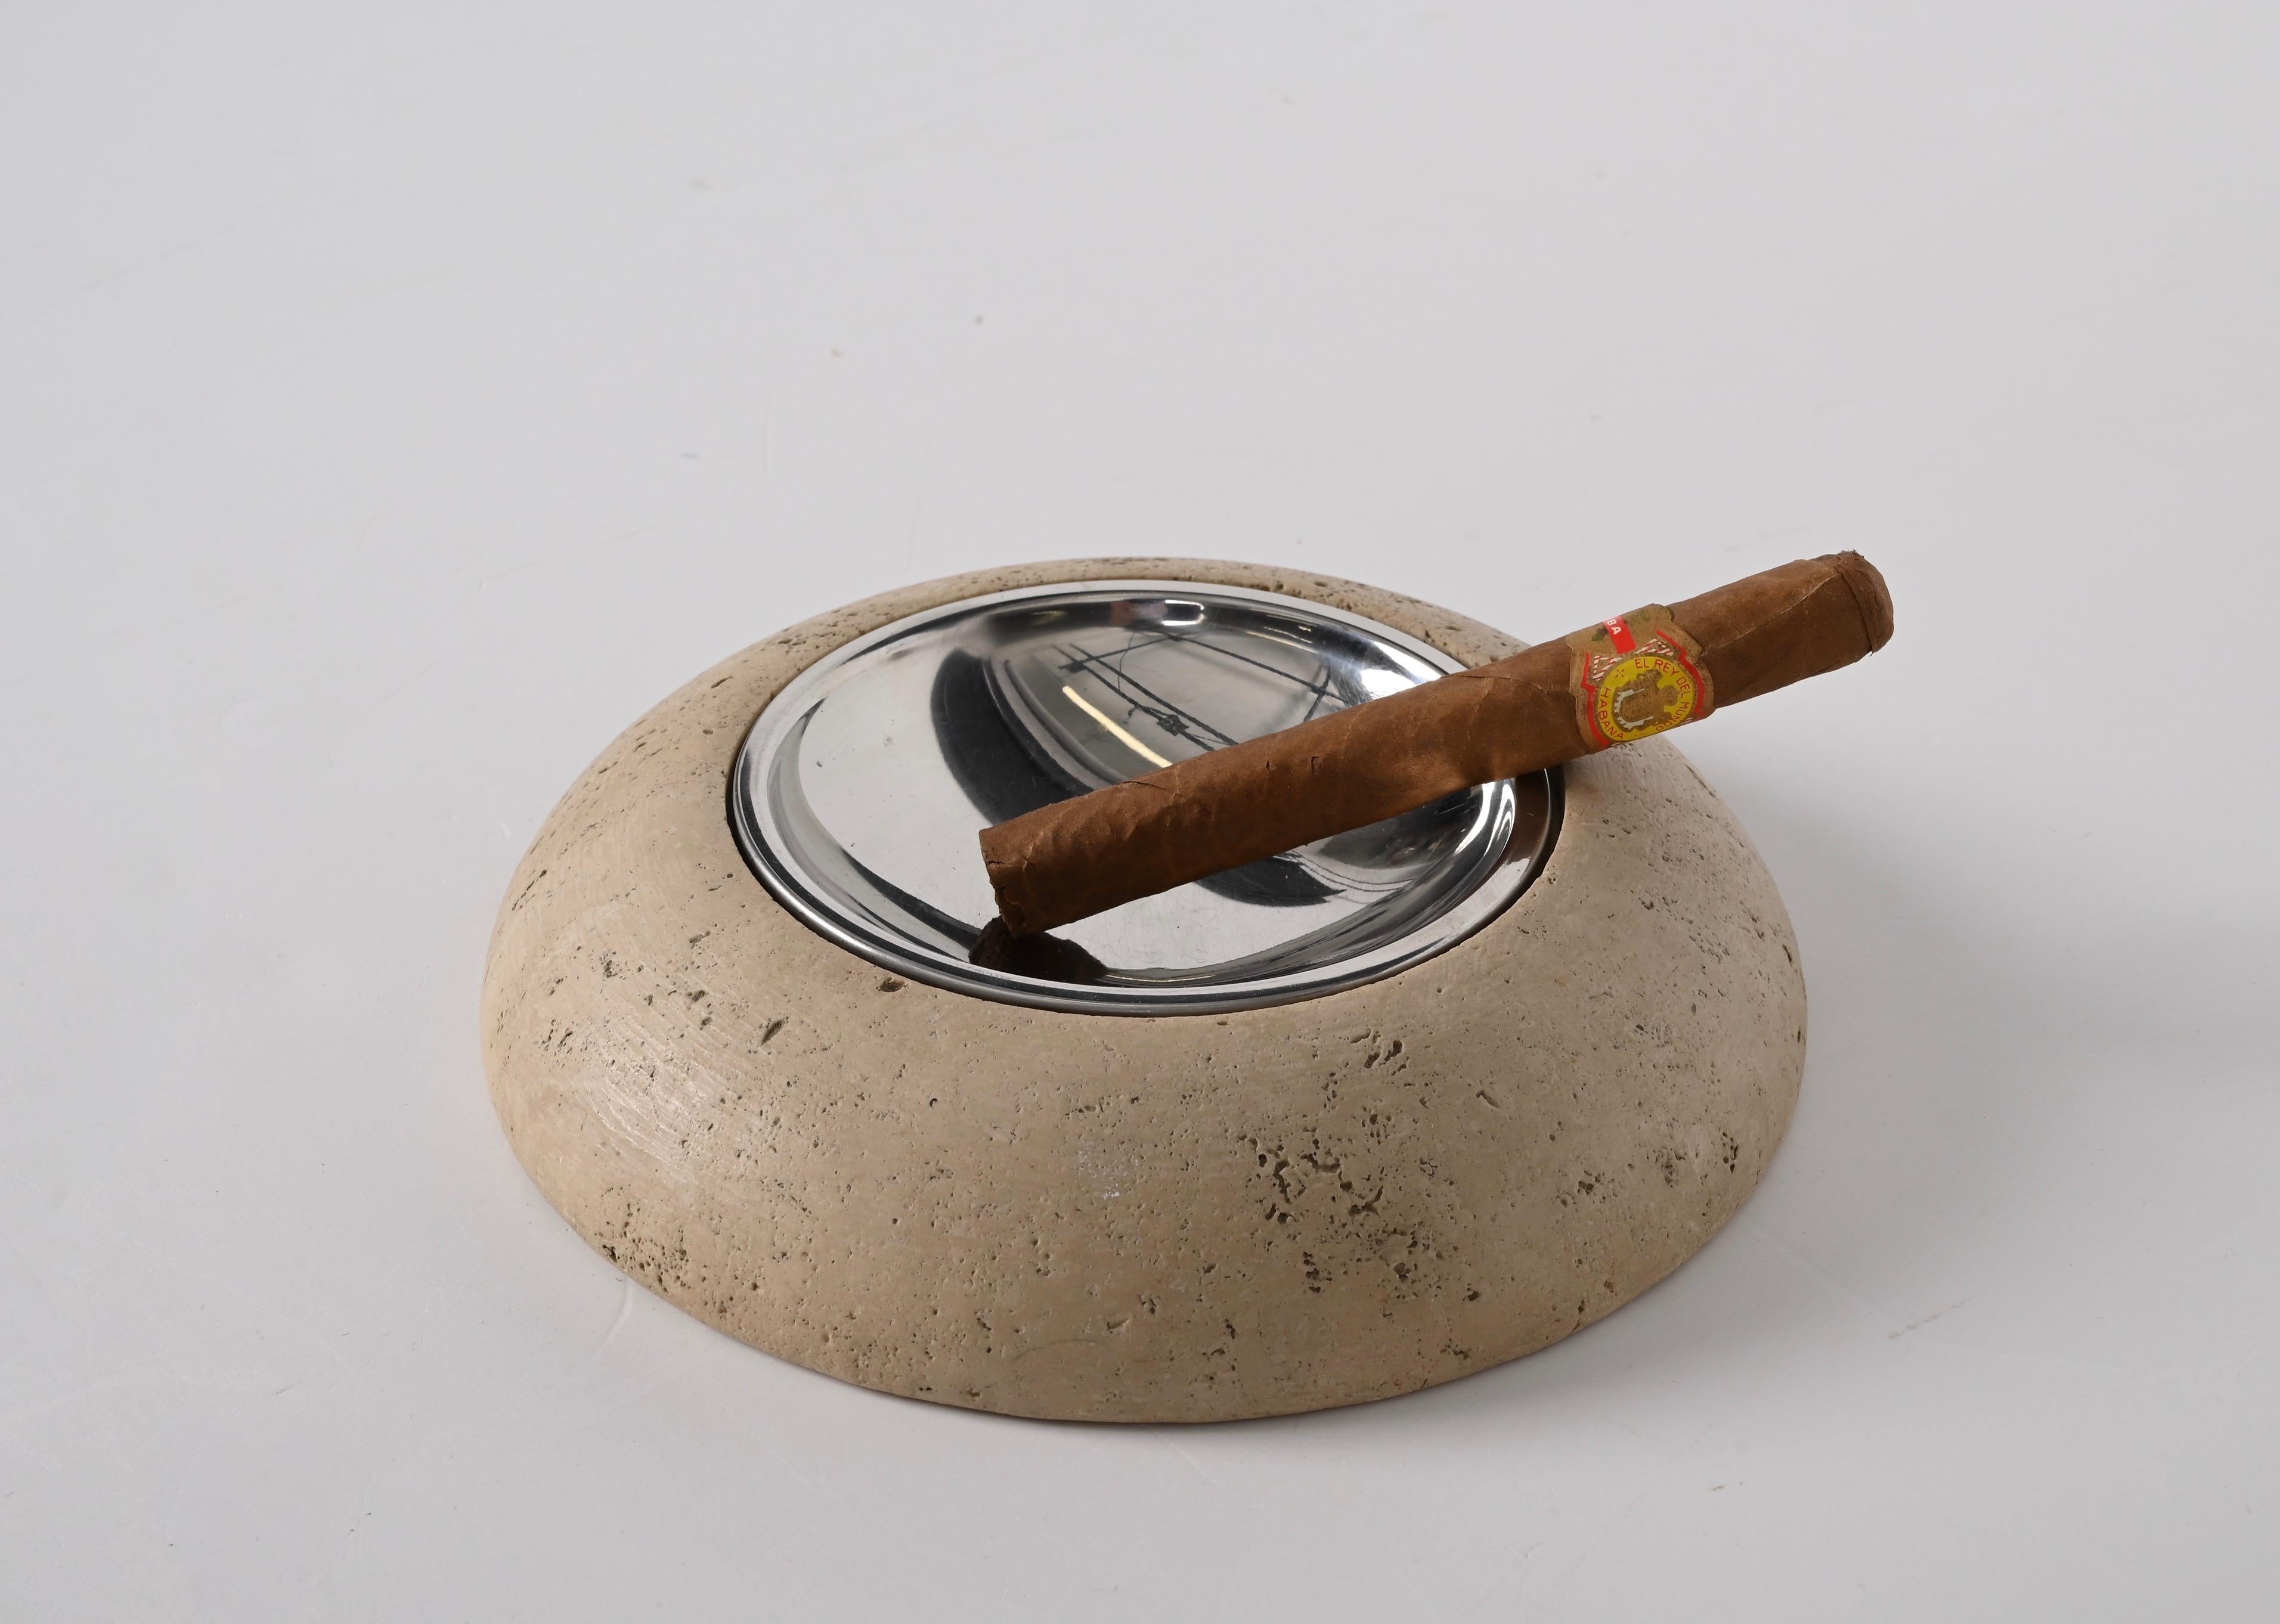 Midcentury Round Ashtray White Travertine Marble and Steel, Mannelli Italy 1970s For Sale 11